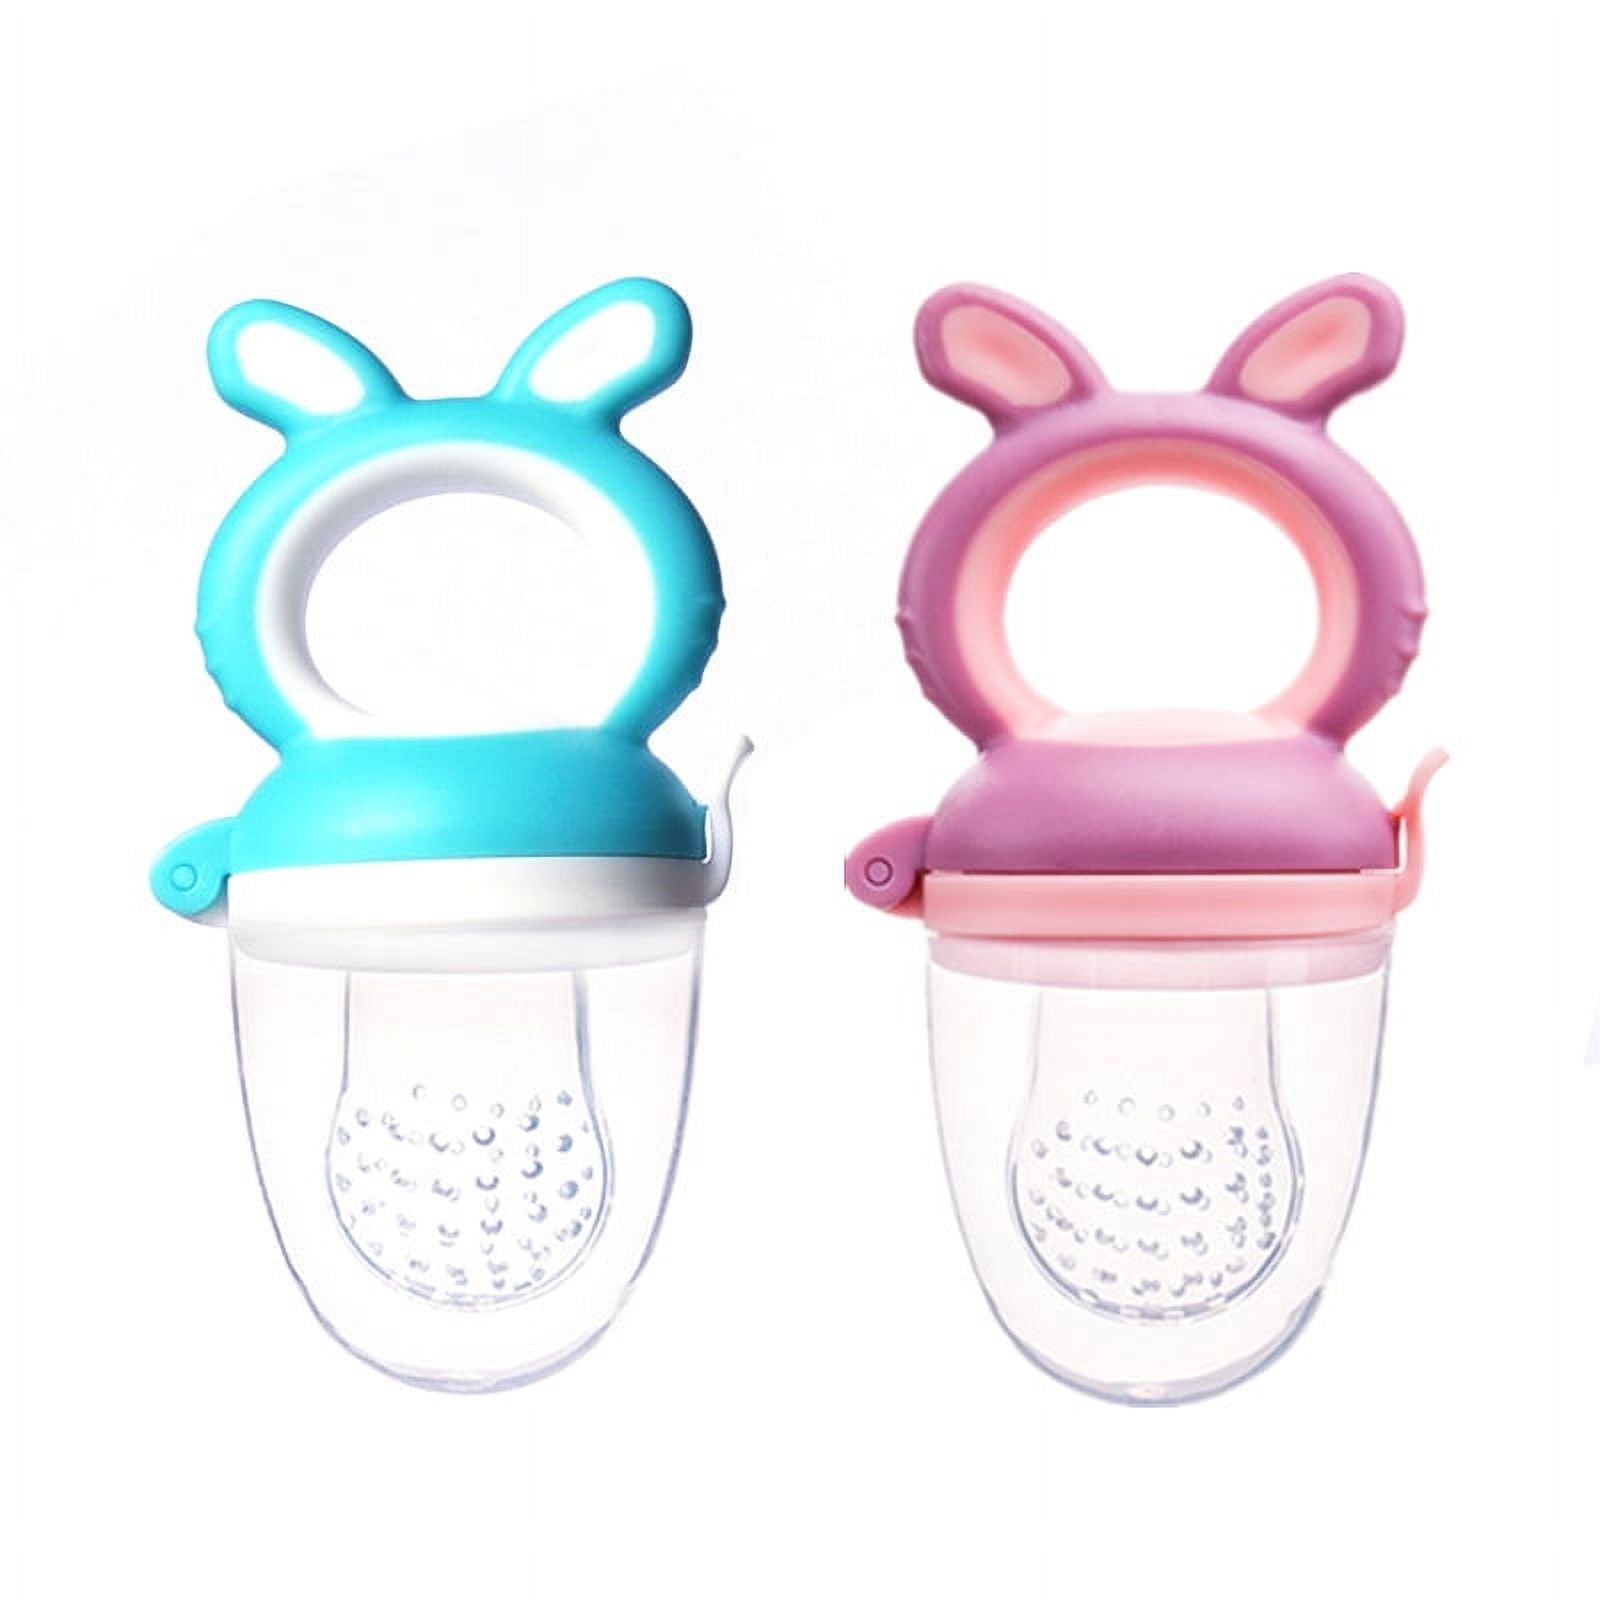 Baby Fruit Feeder/Food Feeder Pacifier for Babies (2 Pack) - HAOBAOBEI Mesh  Teethers for Babies, Infant Teething Toy in Appetite Stimulating Colors